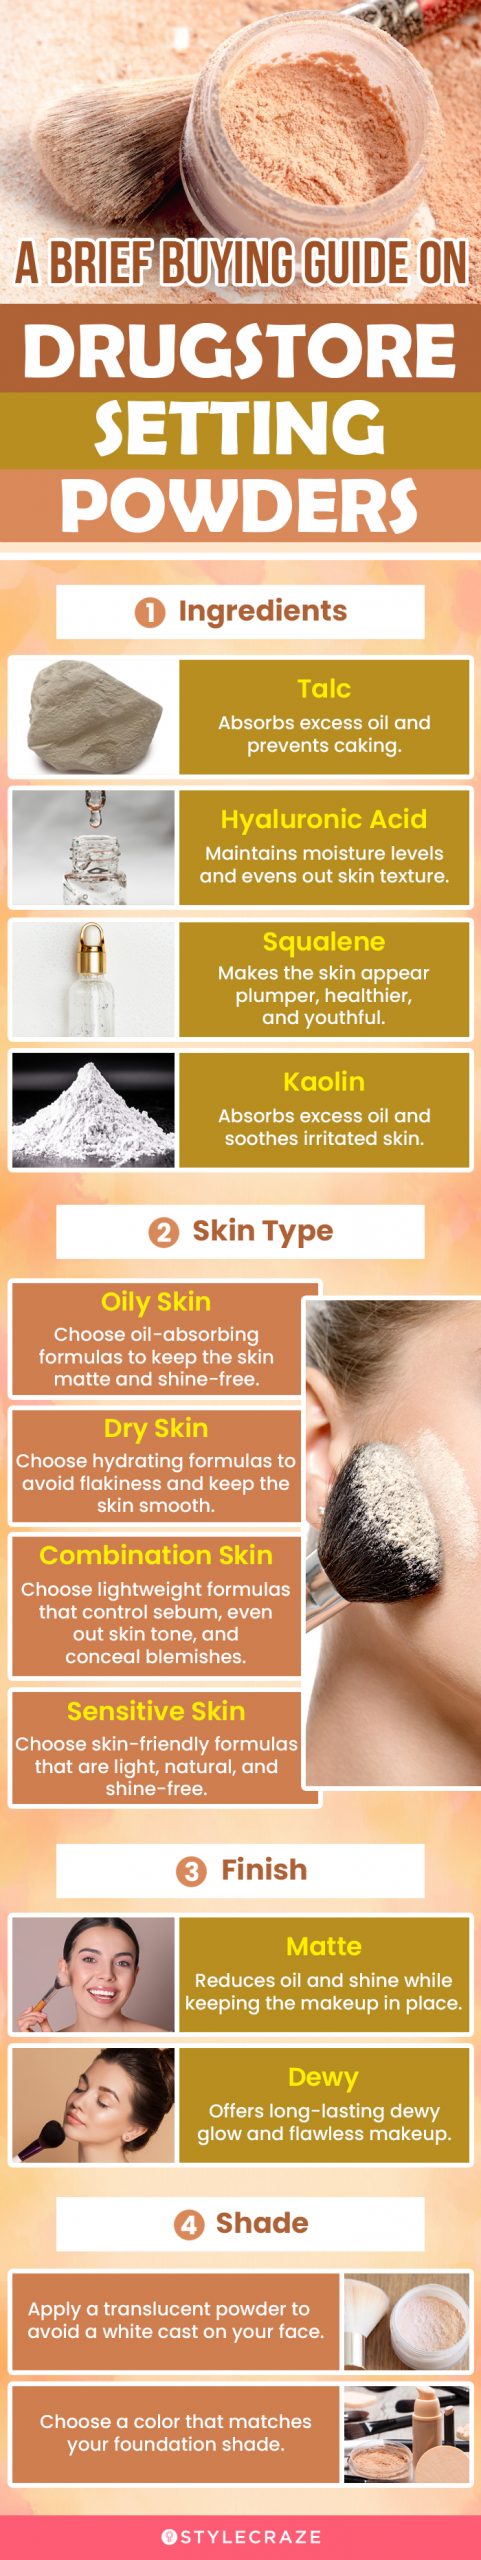 A Brief Buying Guide On Drugstore Setting Powders [infographic]